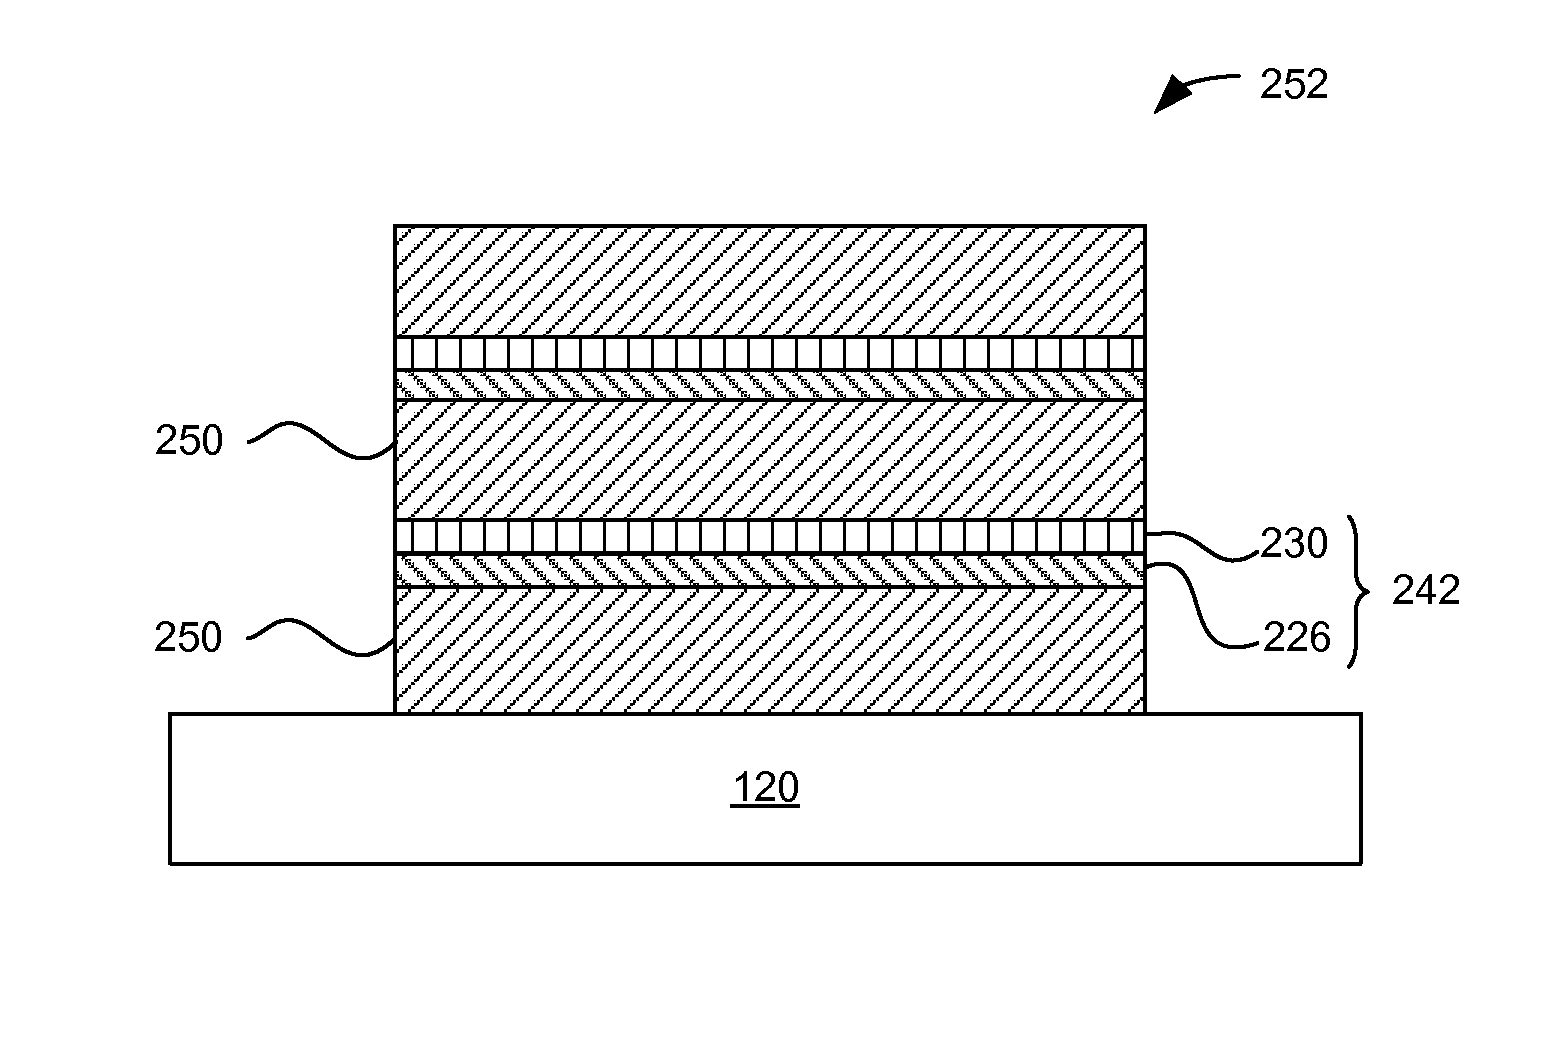 Deposition of non-isostructural layers for flexible substrate